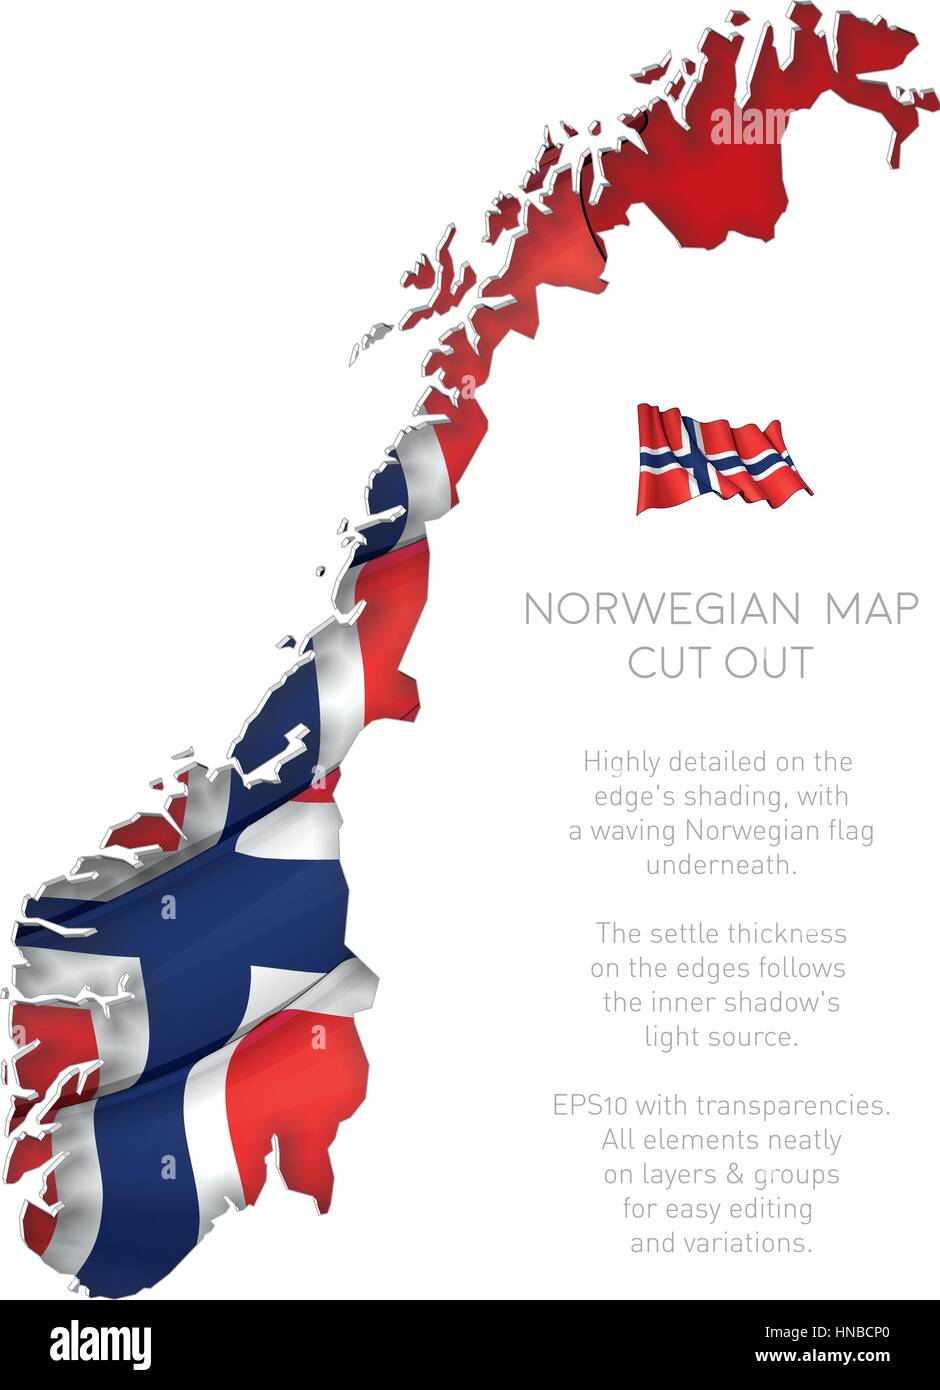 Vector Illustration of a cut out Map of Norway with a waving Norwegian flag underneath. All elements neatly on layers and groups for easy editing and  Stock Vector